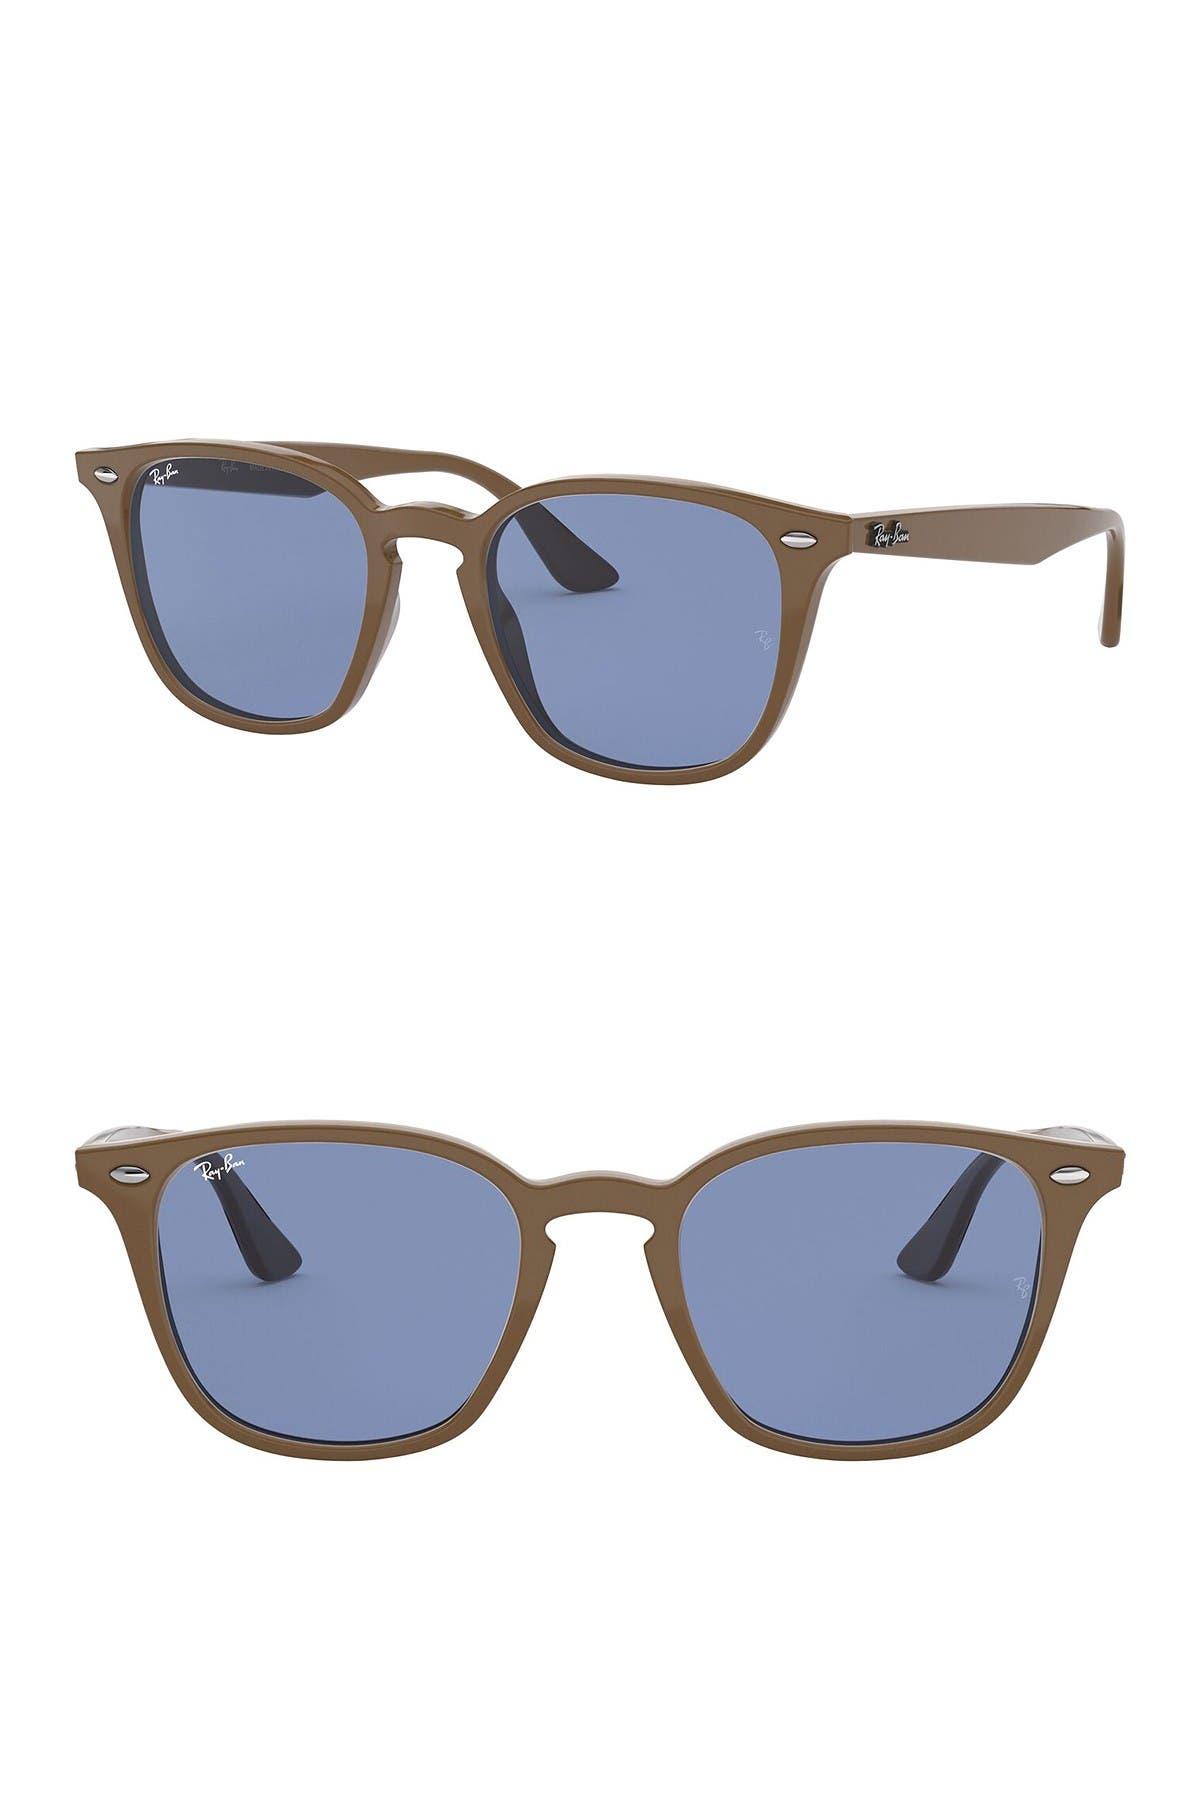 nordstrom ray ban womens